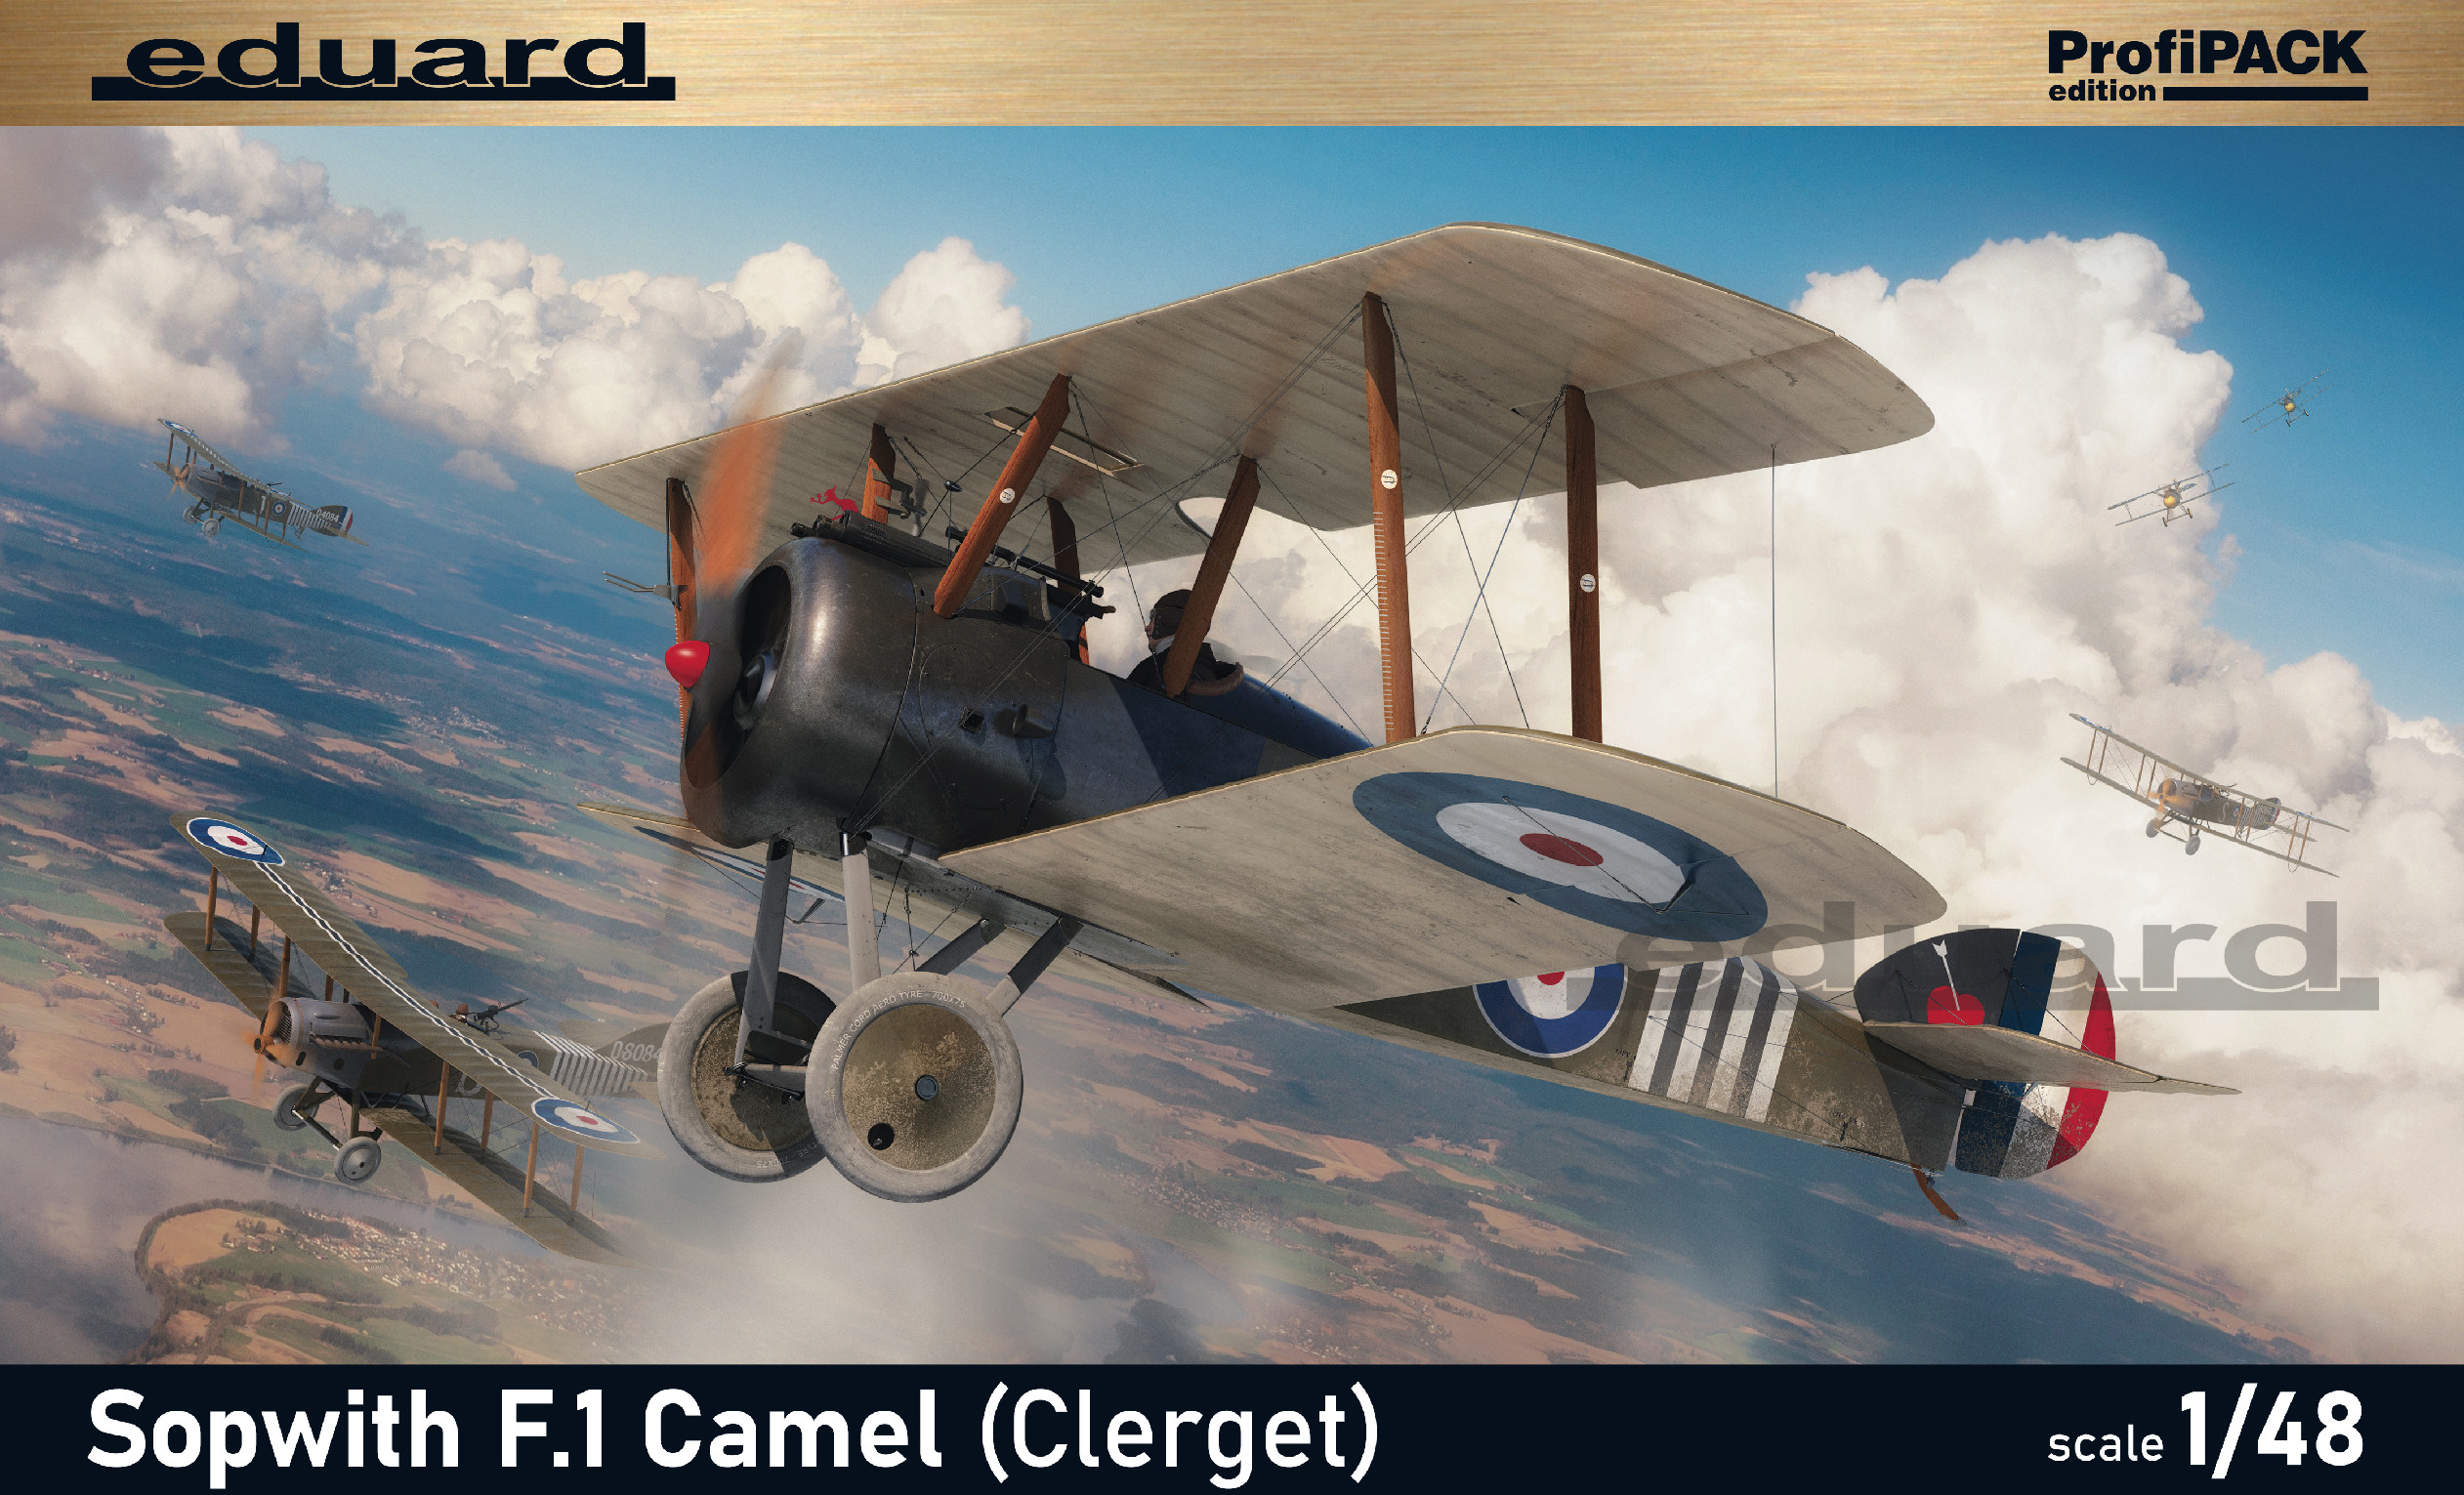 1/48 Sopwith F.1 Camel (Clerget engine) (Profipack)